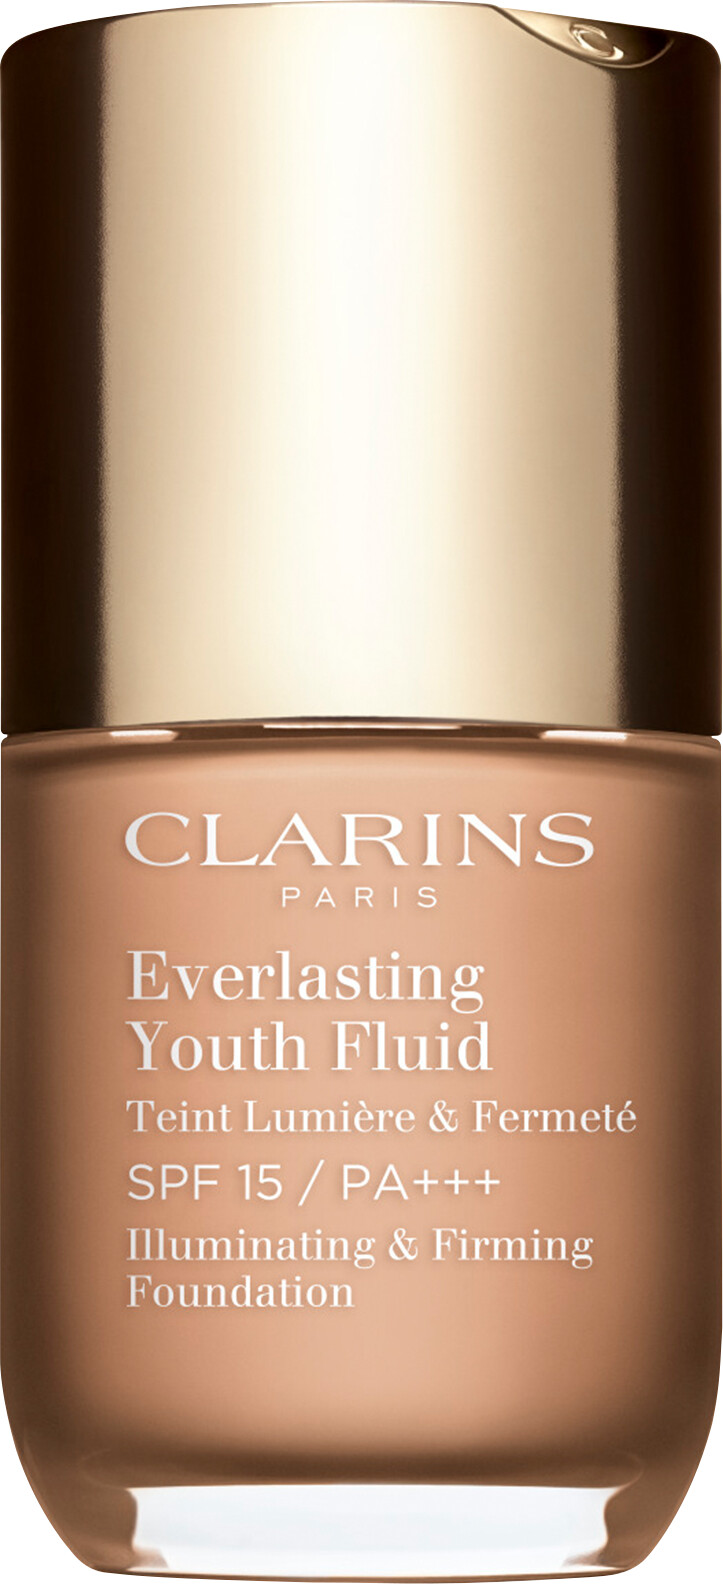 Clarins Everlasting Youth Fluid Illuminating and Firming Foundation SPF15 30ml 109 - Wheat